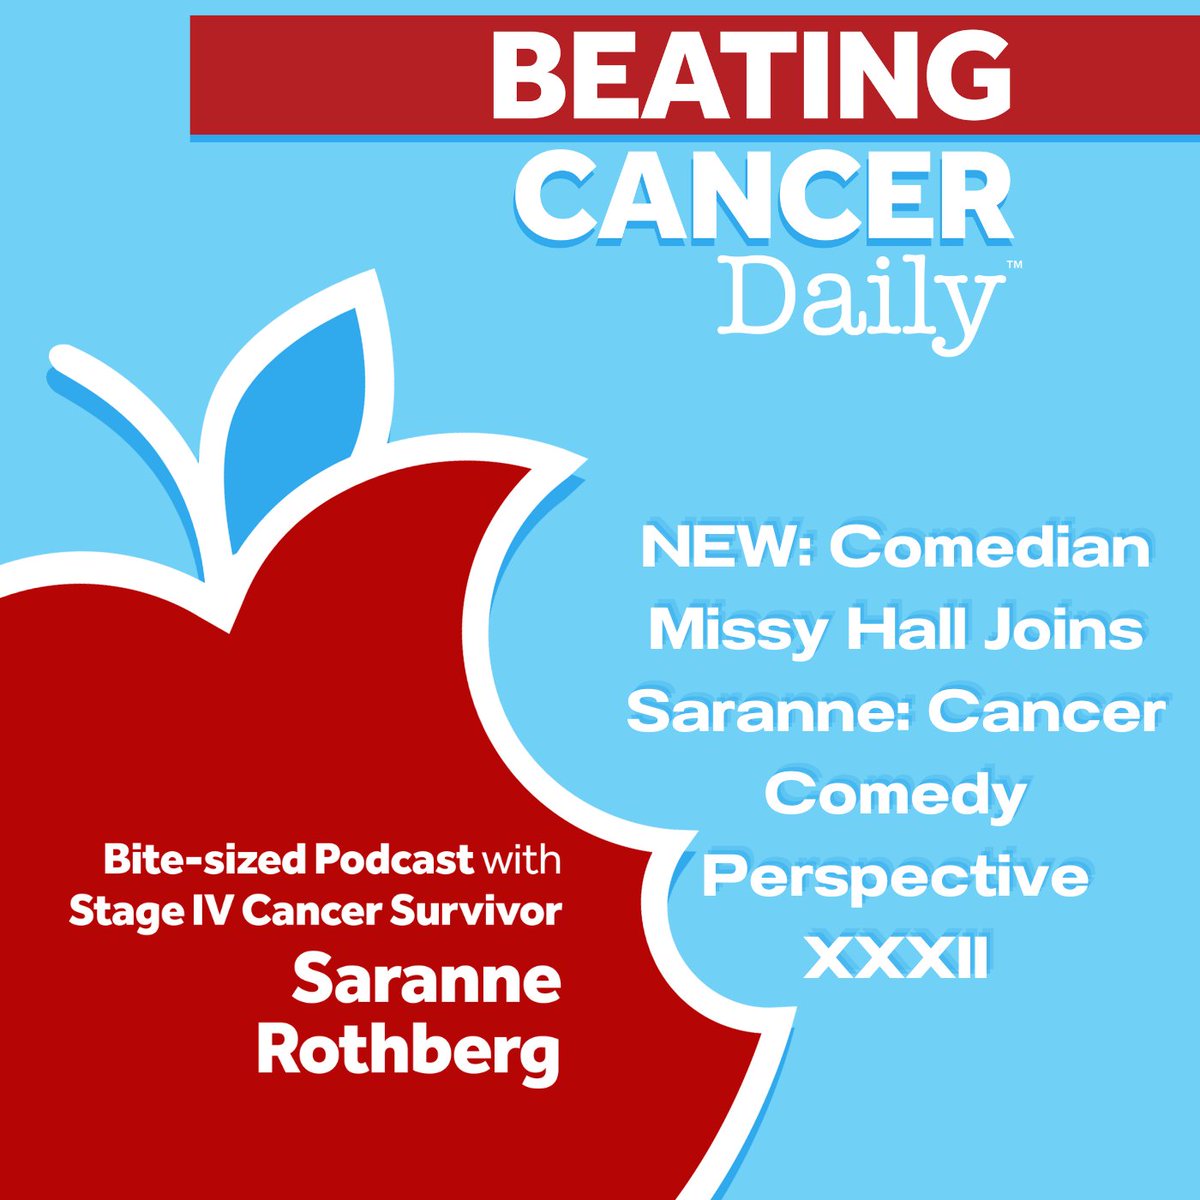 Today on #BeatingCancerDaily, NEW: Comedian Missy Hall Joins Saranne: Cancer Comedy Perspective  XXXII
Listen wherever you listen to podcasts. 
ComedyCures.org

#ComedyCures #LaughDaily #InstaLaugh #laughtherapy #NonProfit #nonprofitlife #standupcomedian #survivor